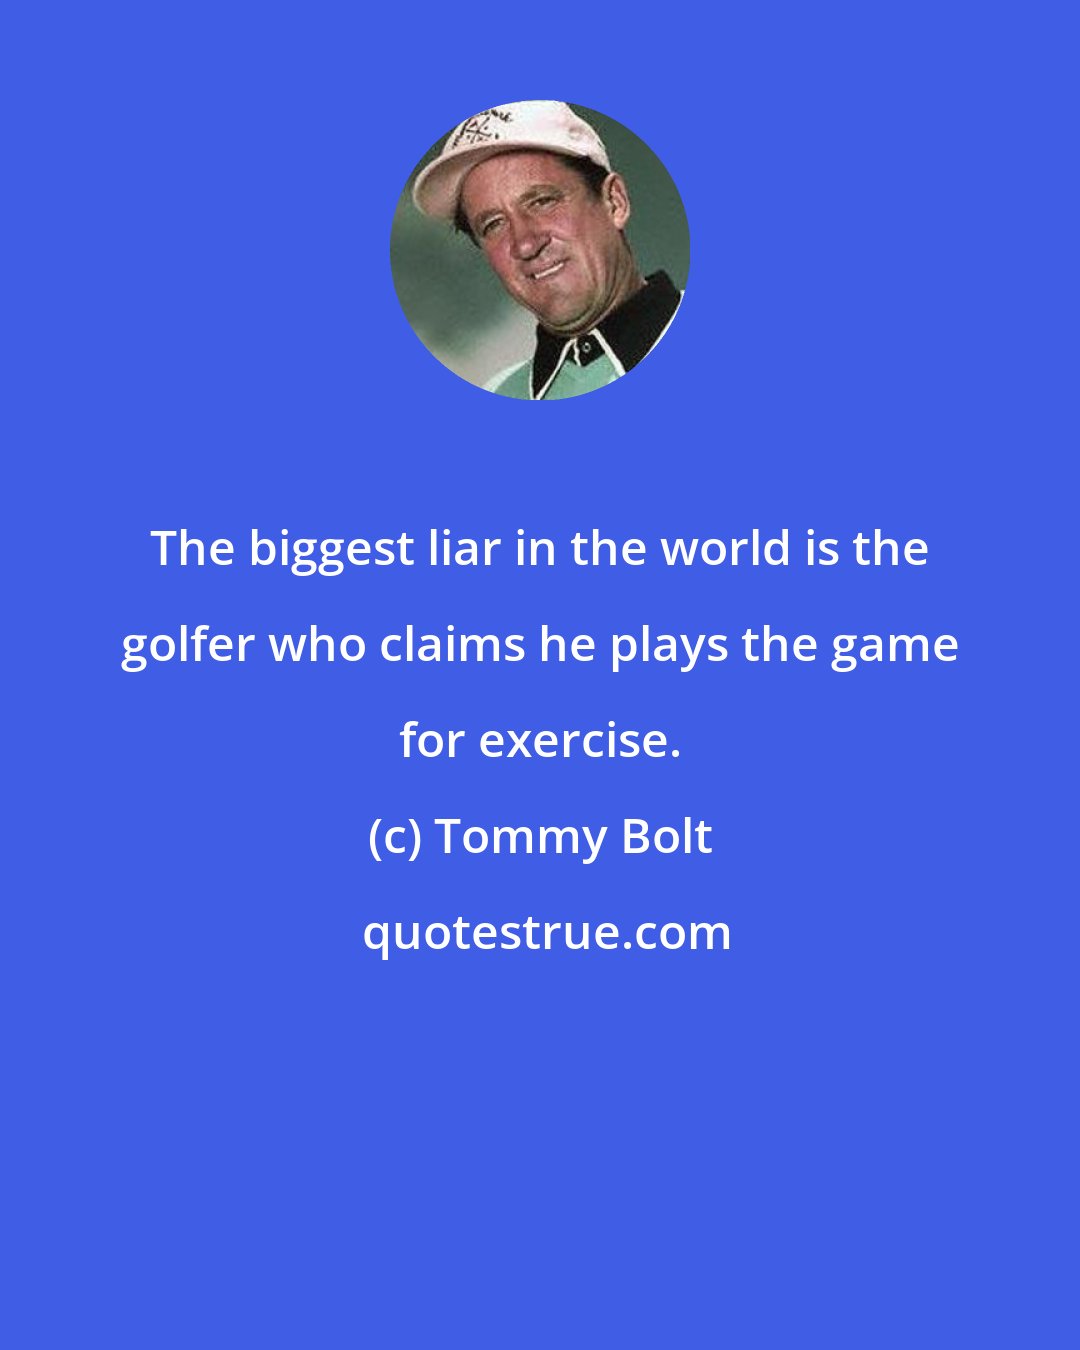 Tommy Bolt: The biggest liar in the world is the golfer who claims he plays the game for exercise.